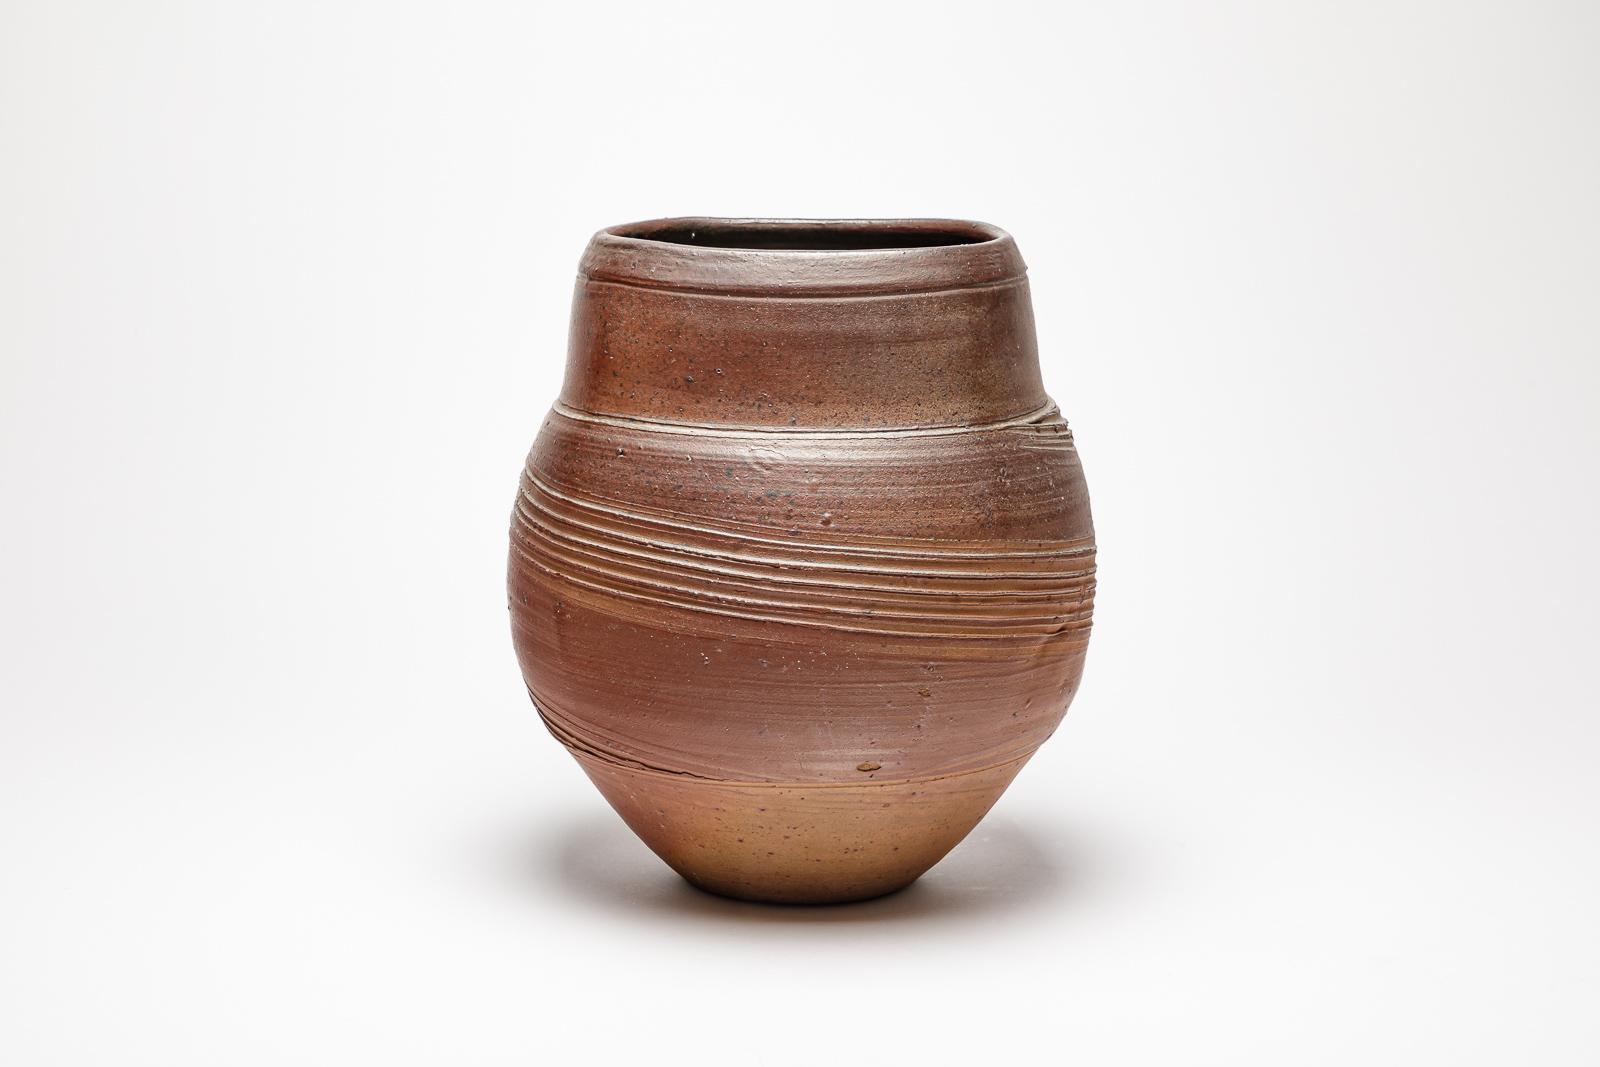 Woodfired Ceramic Vase, Eric Astoul, 1986 In Excellent Condition For Sale In Saint-Ouen, FR